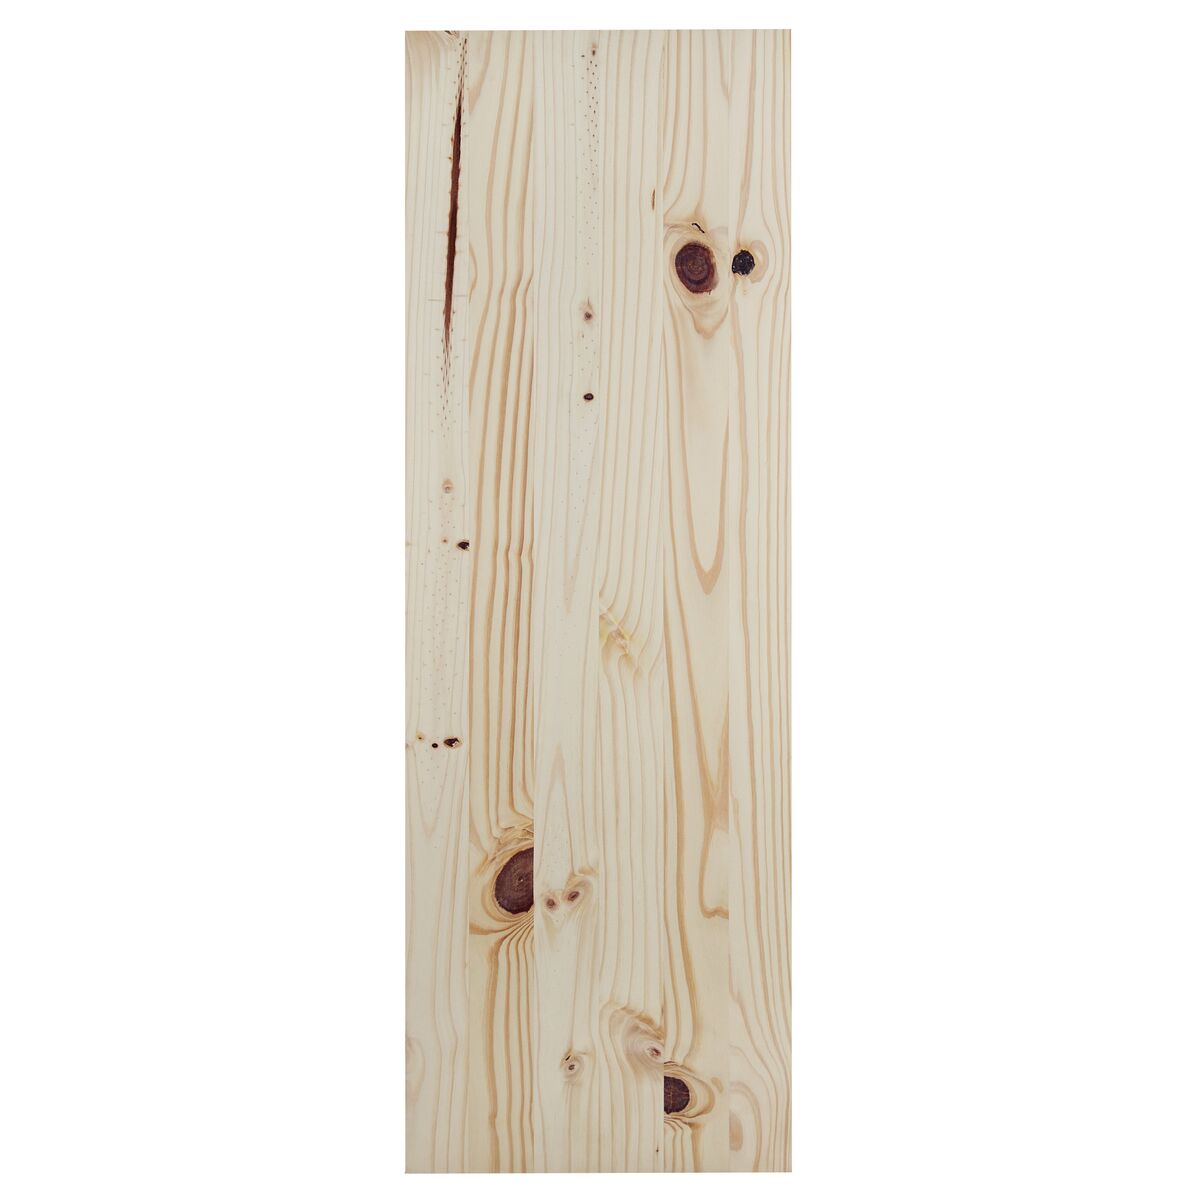 Tramontina Modulare CC 1200x200x18 mm Pine Wood Panel with a Natural Finish